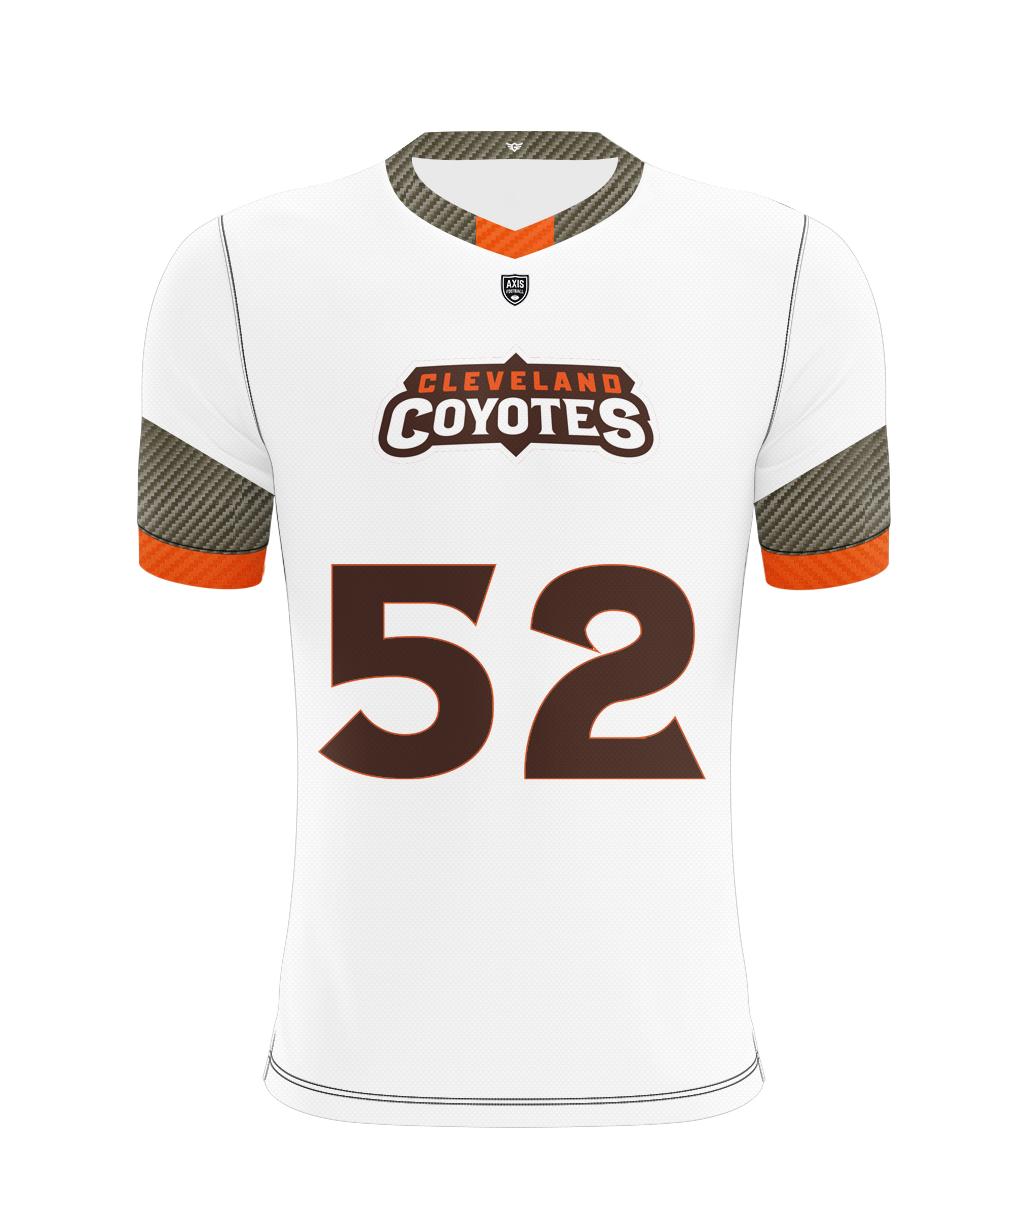 Cleveland Coyotes Away Jersey